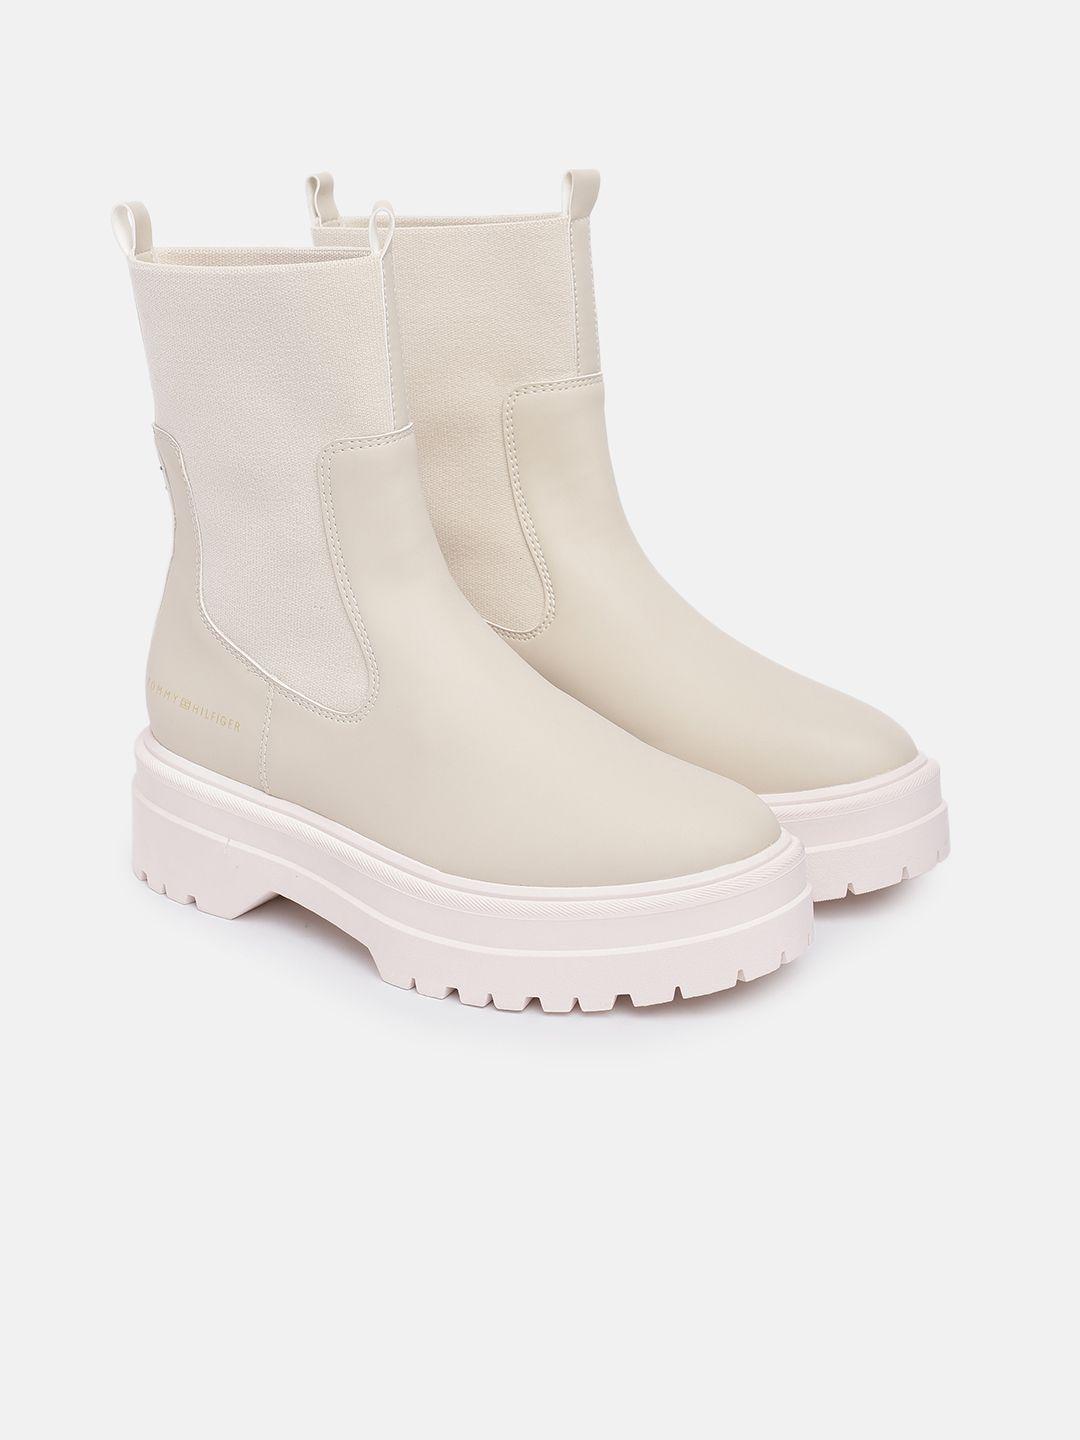 tommy hilfiger women solid high-top platform rainboot style chunky boots